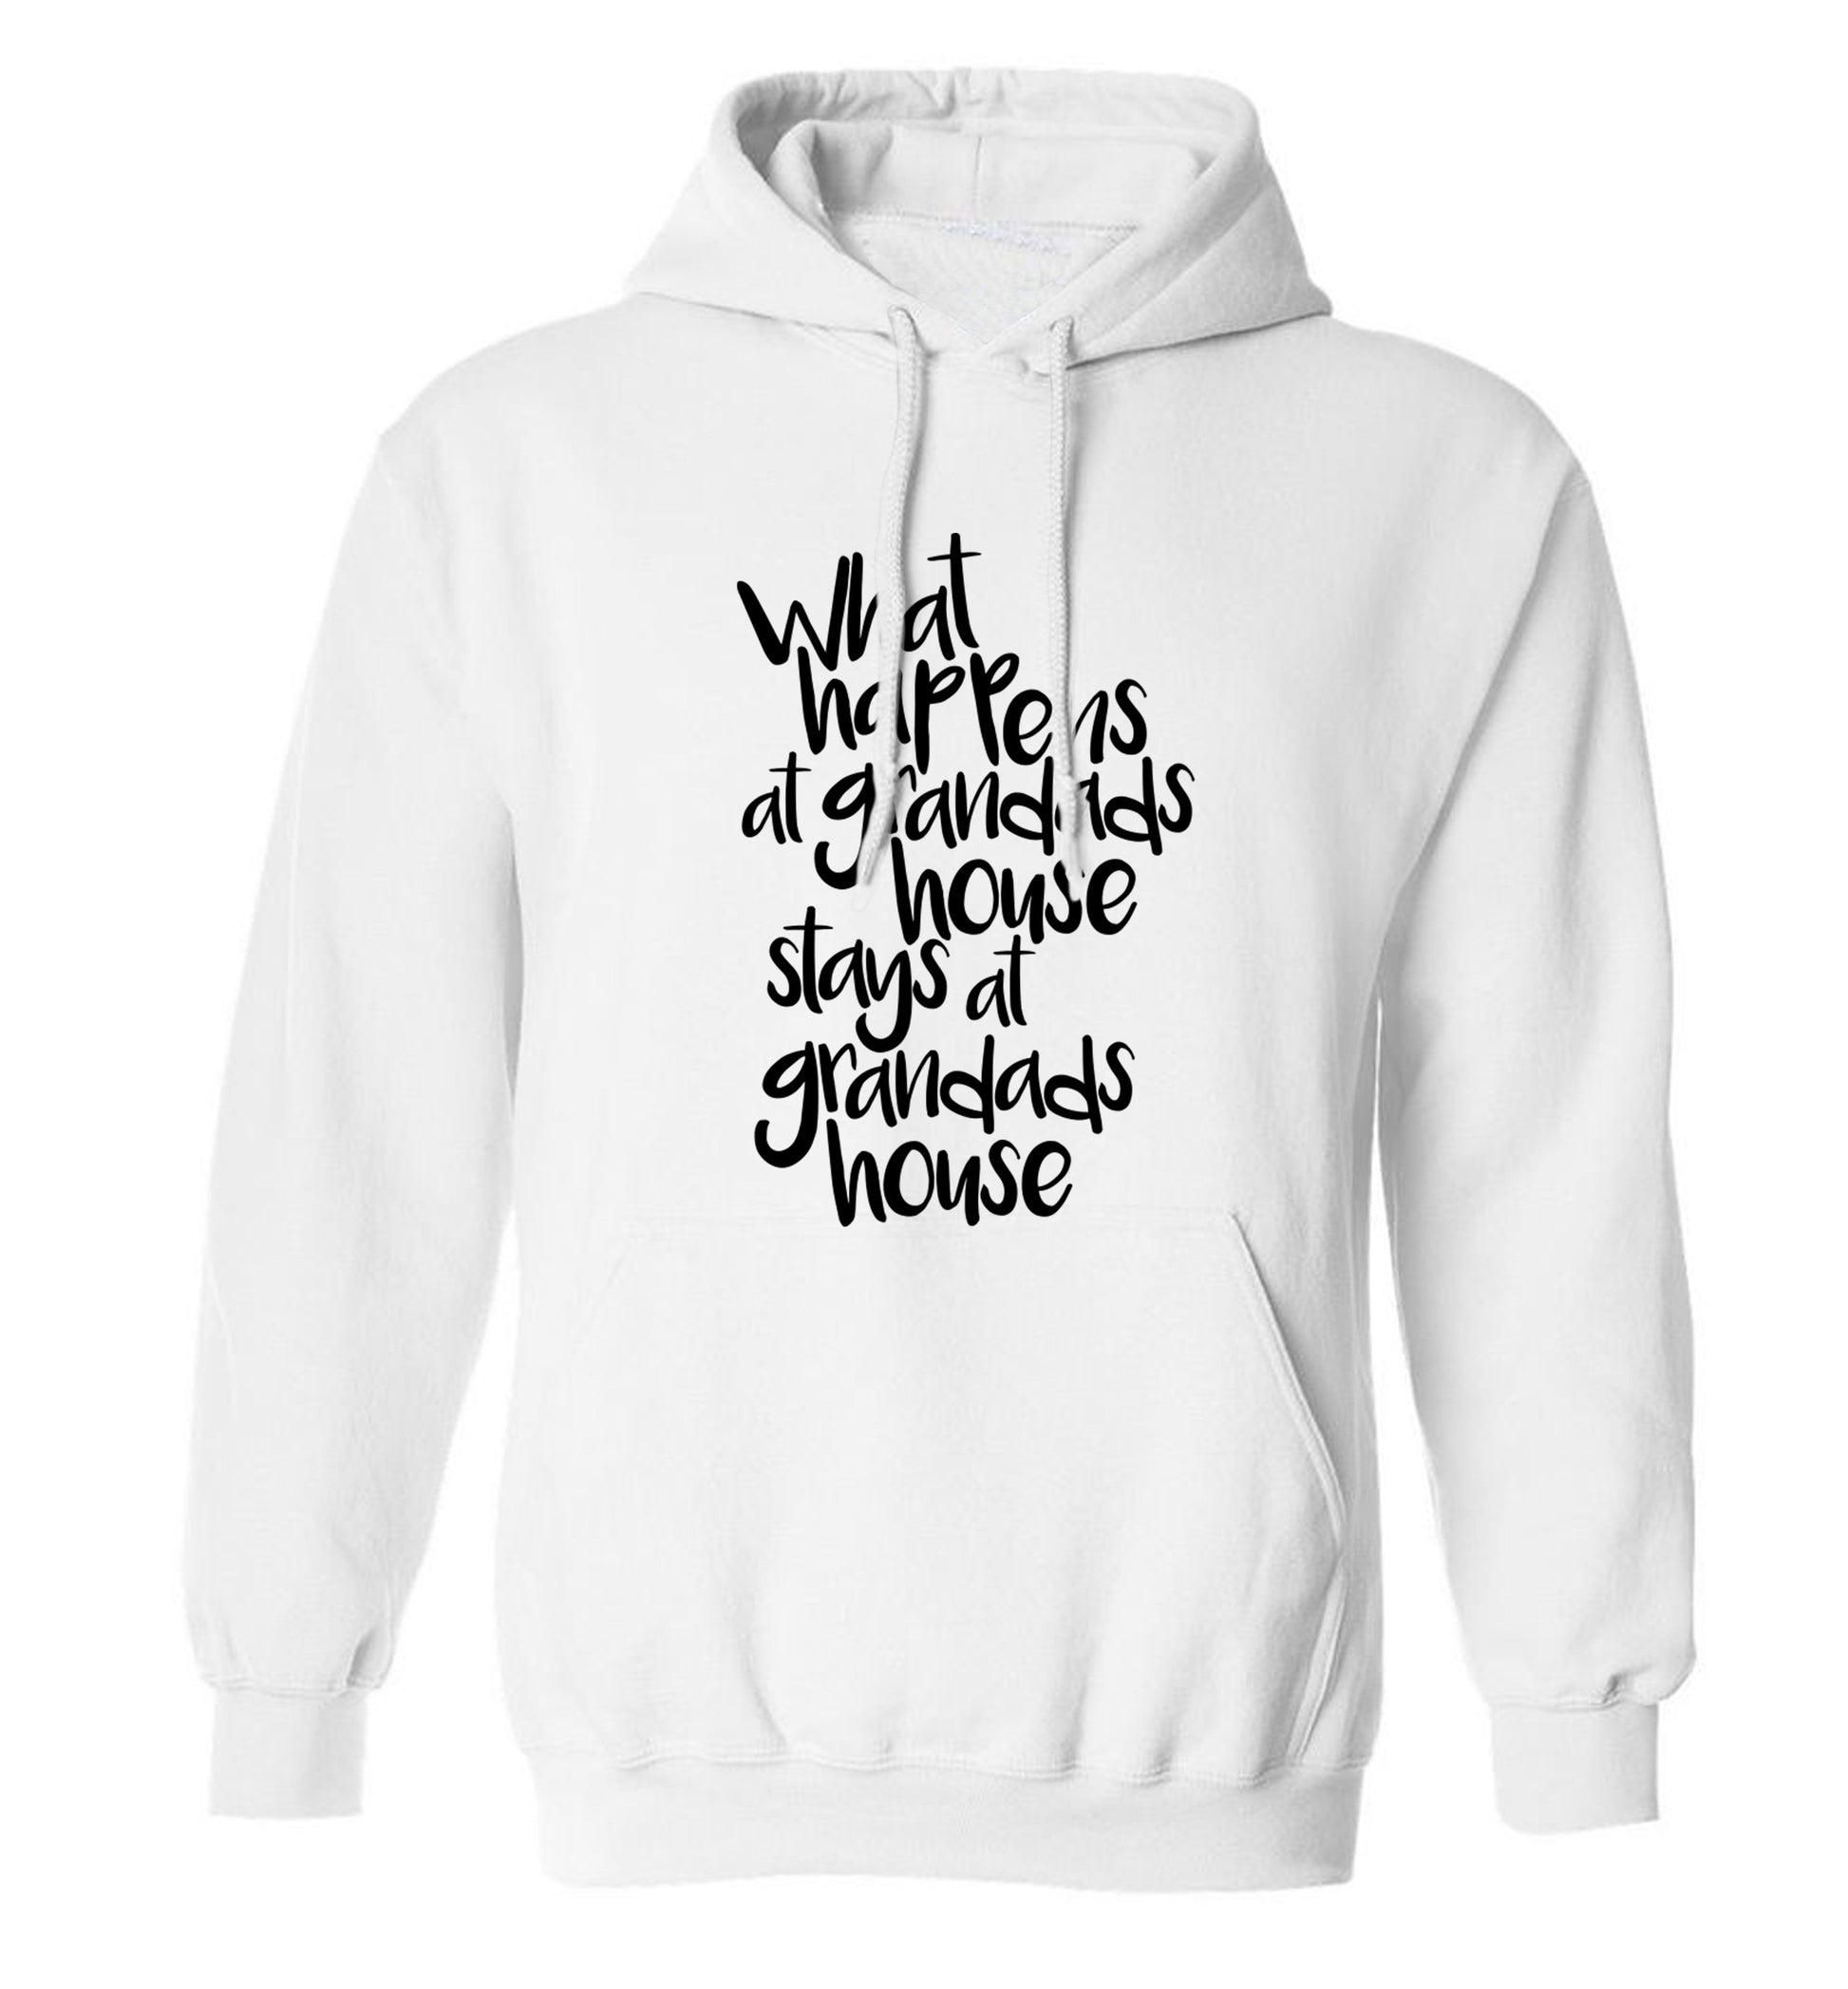 What happens at grandads house stays at grandads house adults unisex white hoodie 2XL